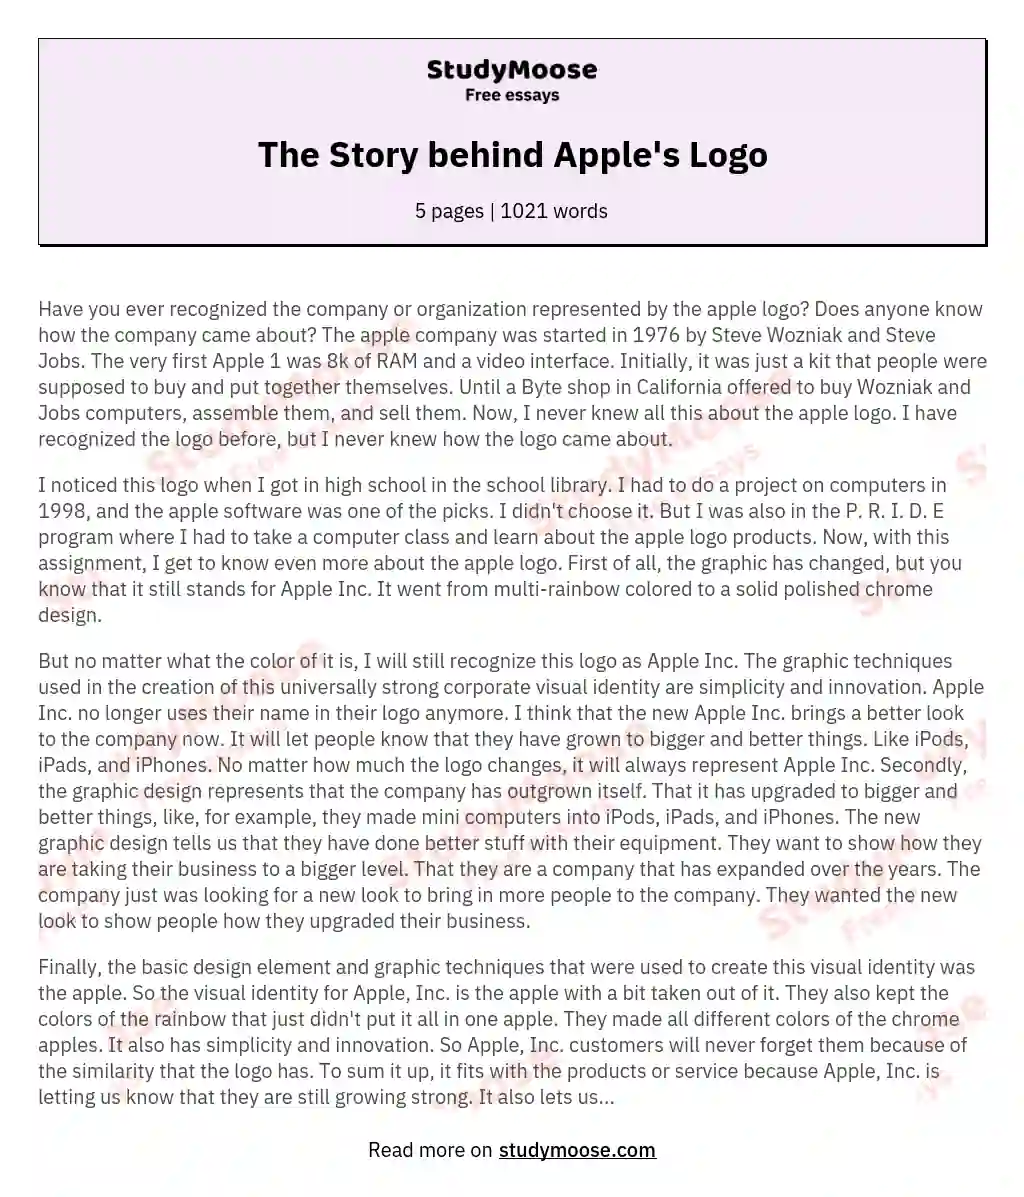 The Story behind Apple's Logo essay